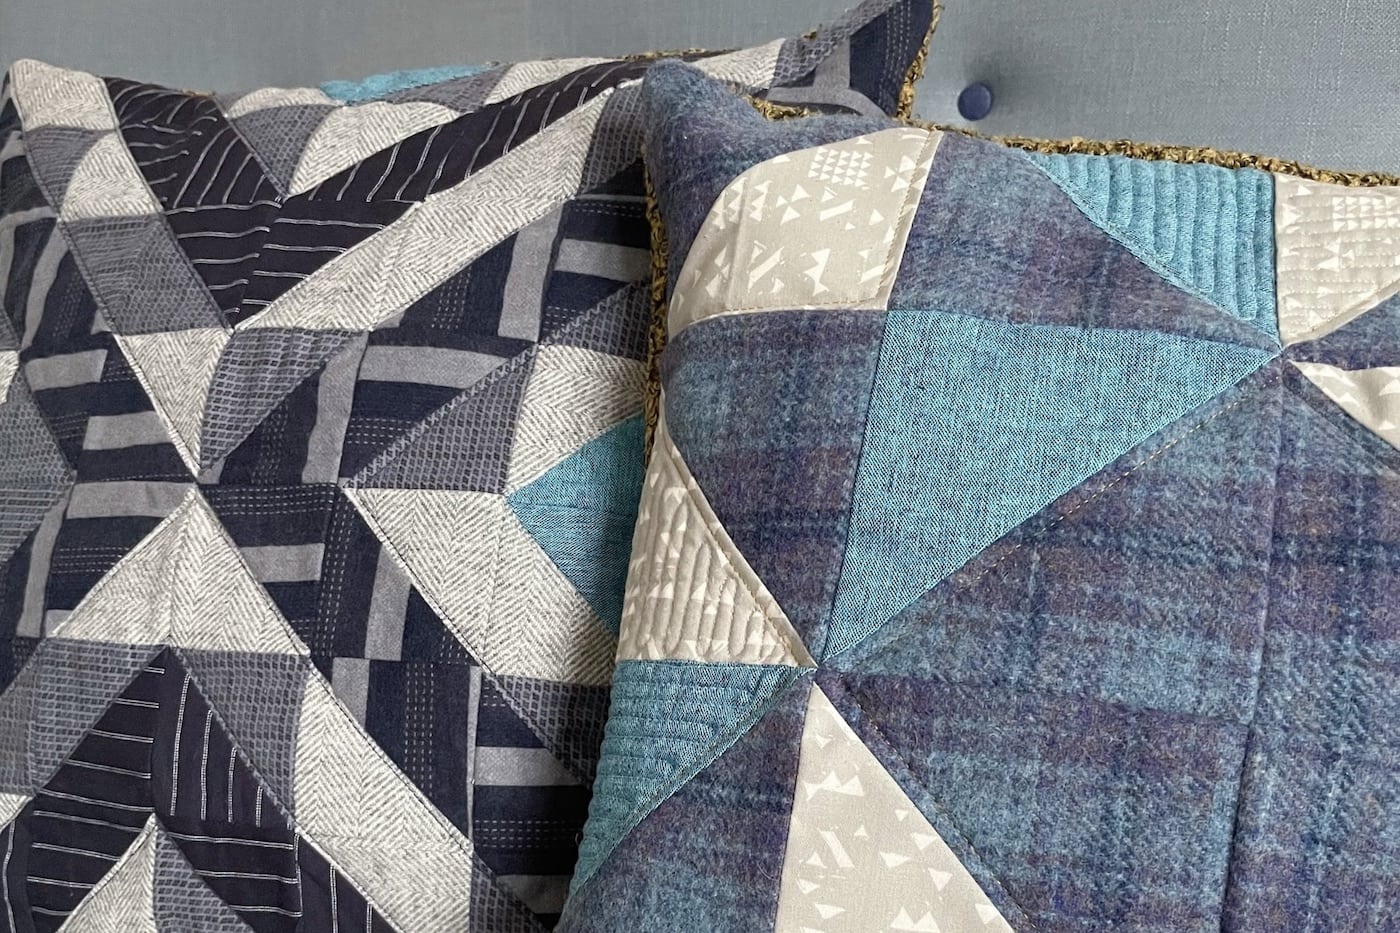 patchwork pillows in navy, cream and black